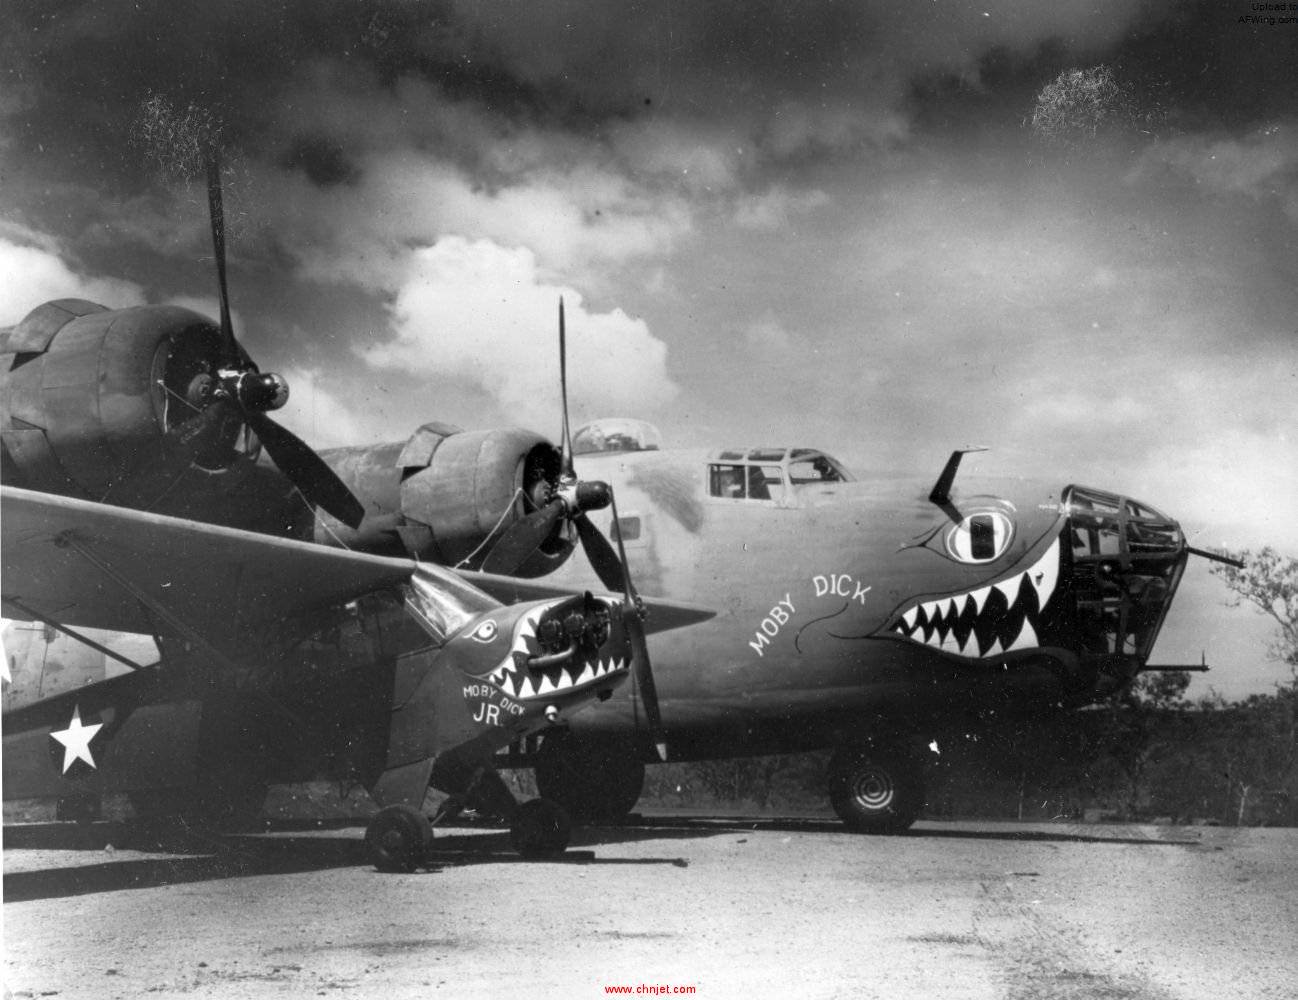 b-24-of-the-90th-bg-moby-dick-possibly-41-24047-along-with-its-slighly-smaller-sidekick.jpg